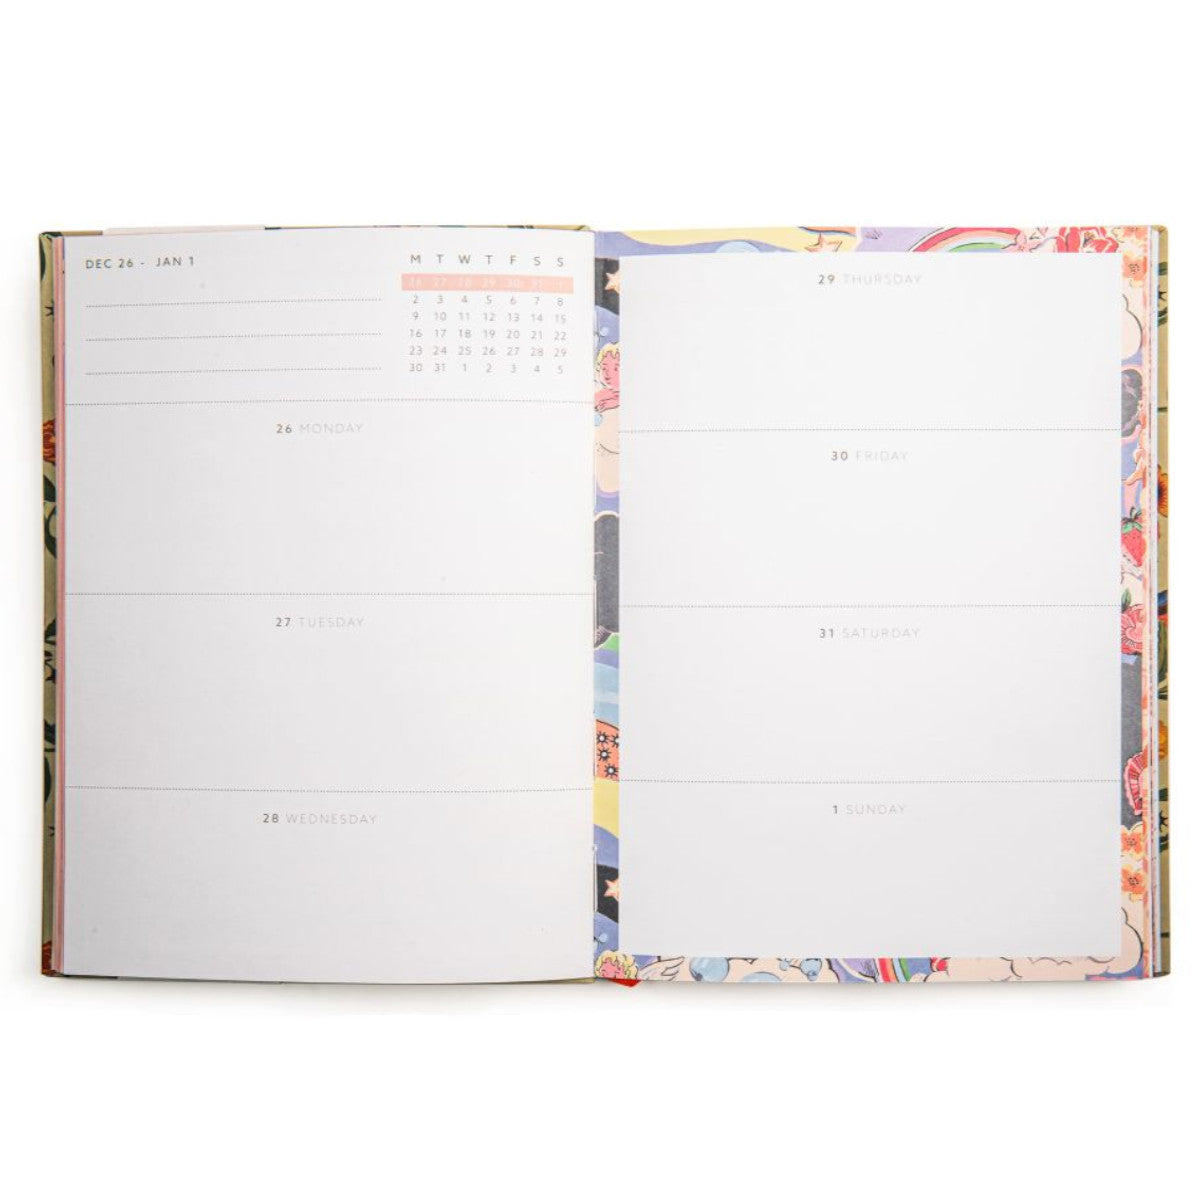 London Wisteria  Weekly 2024 A5  Diary